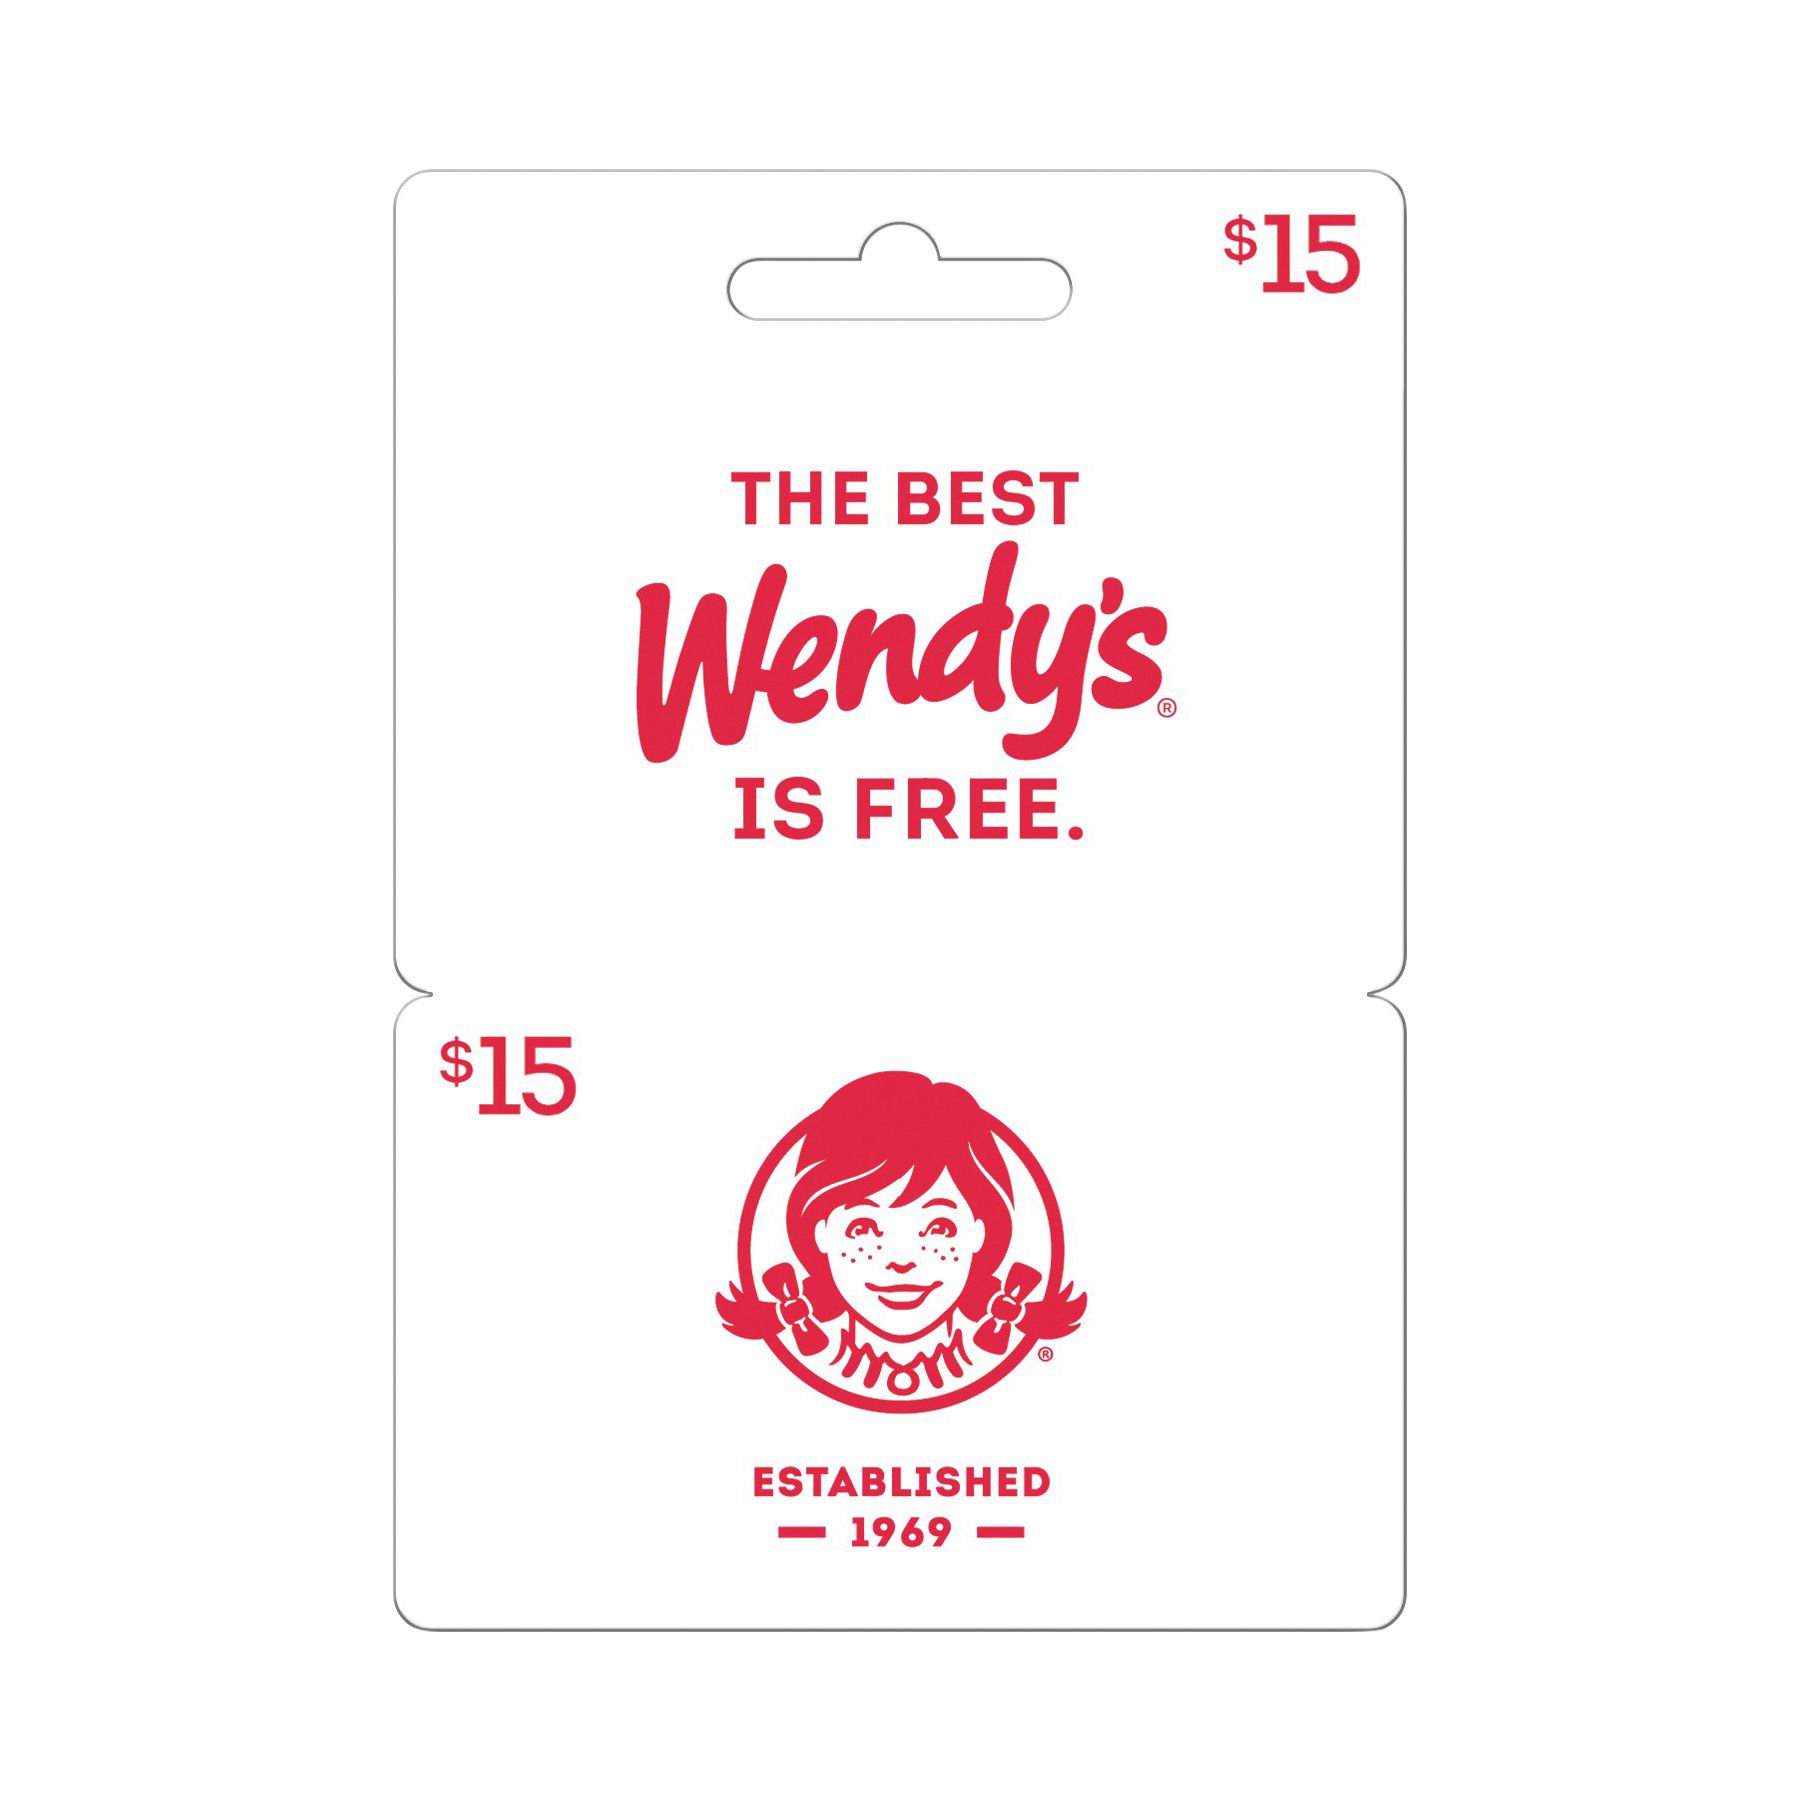 Fast Food Gift Cards